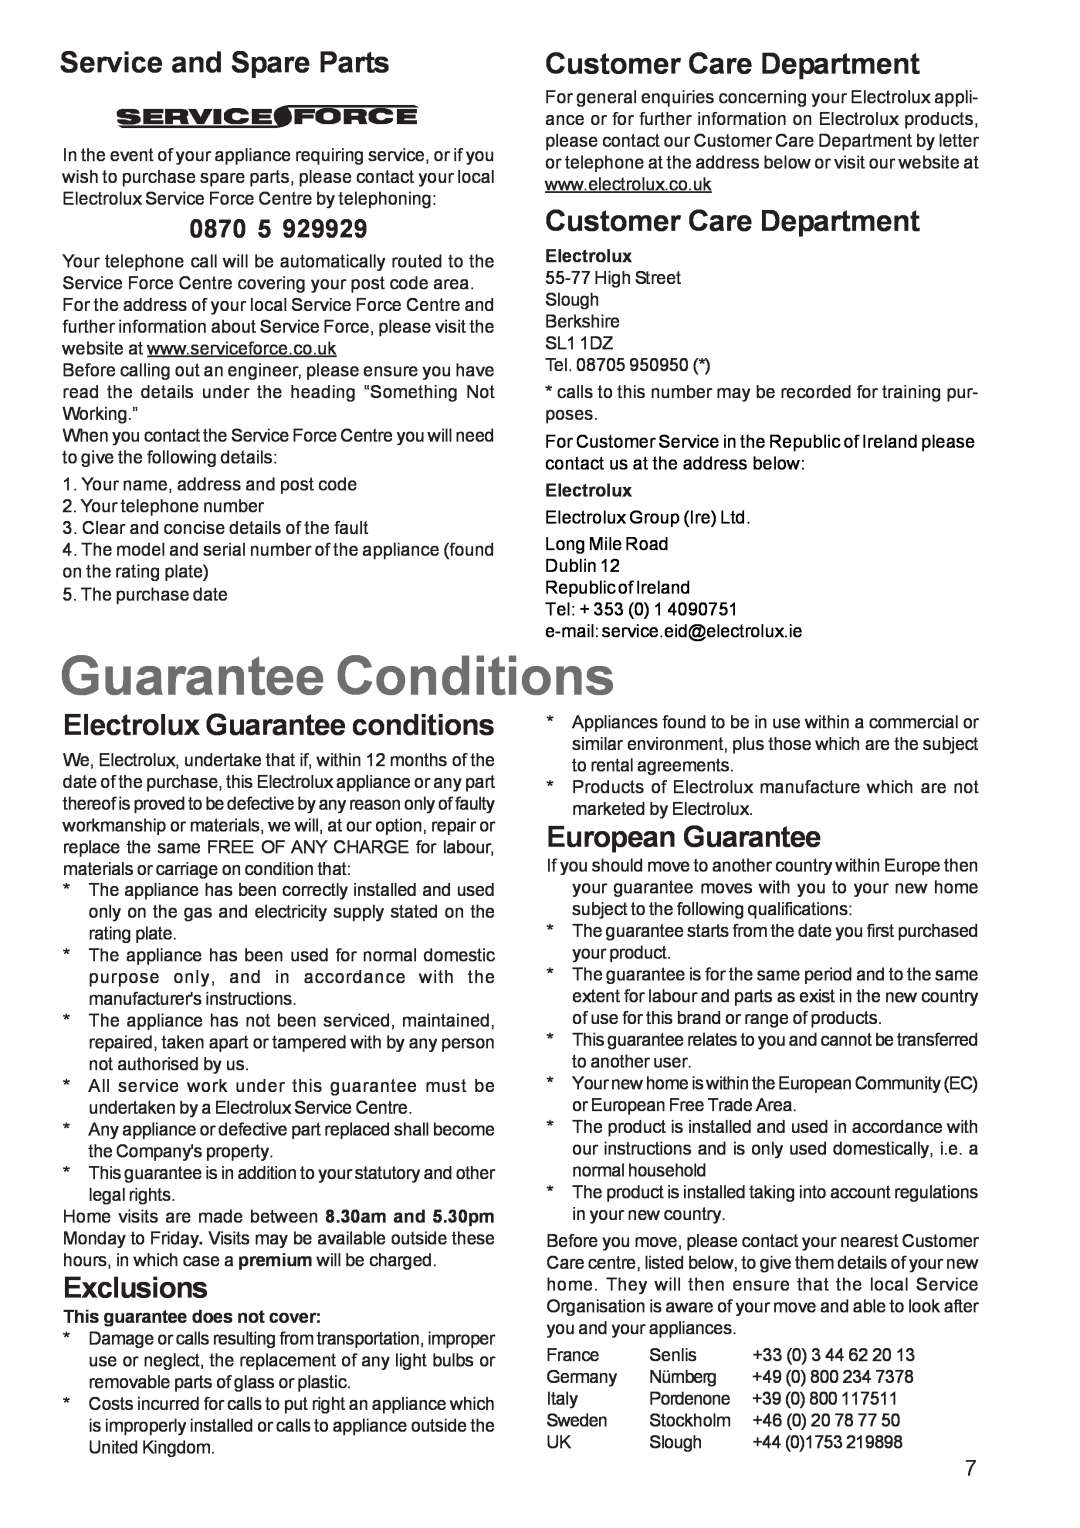 Electrolux EHG 7763 manual Guarantee Conditions, Service and Spare Parts, Customer Care Department, Exclusions, 0870 5 